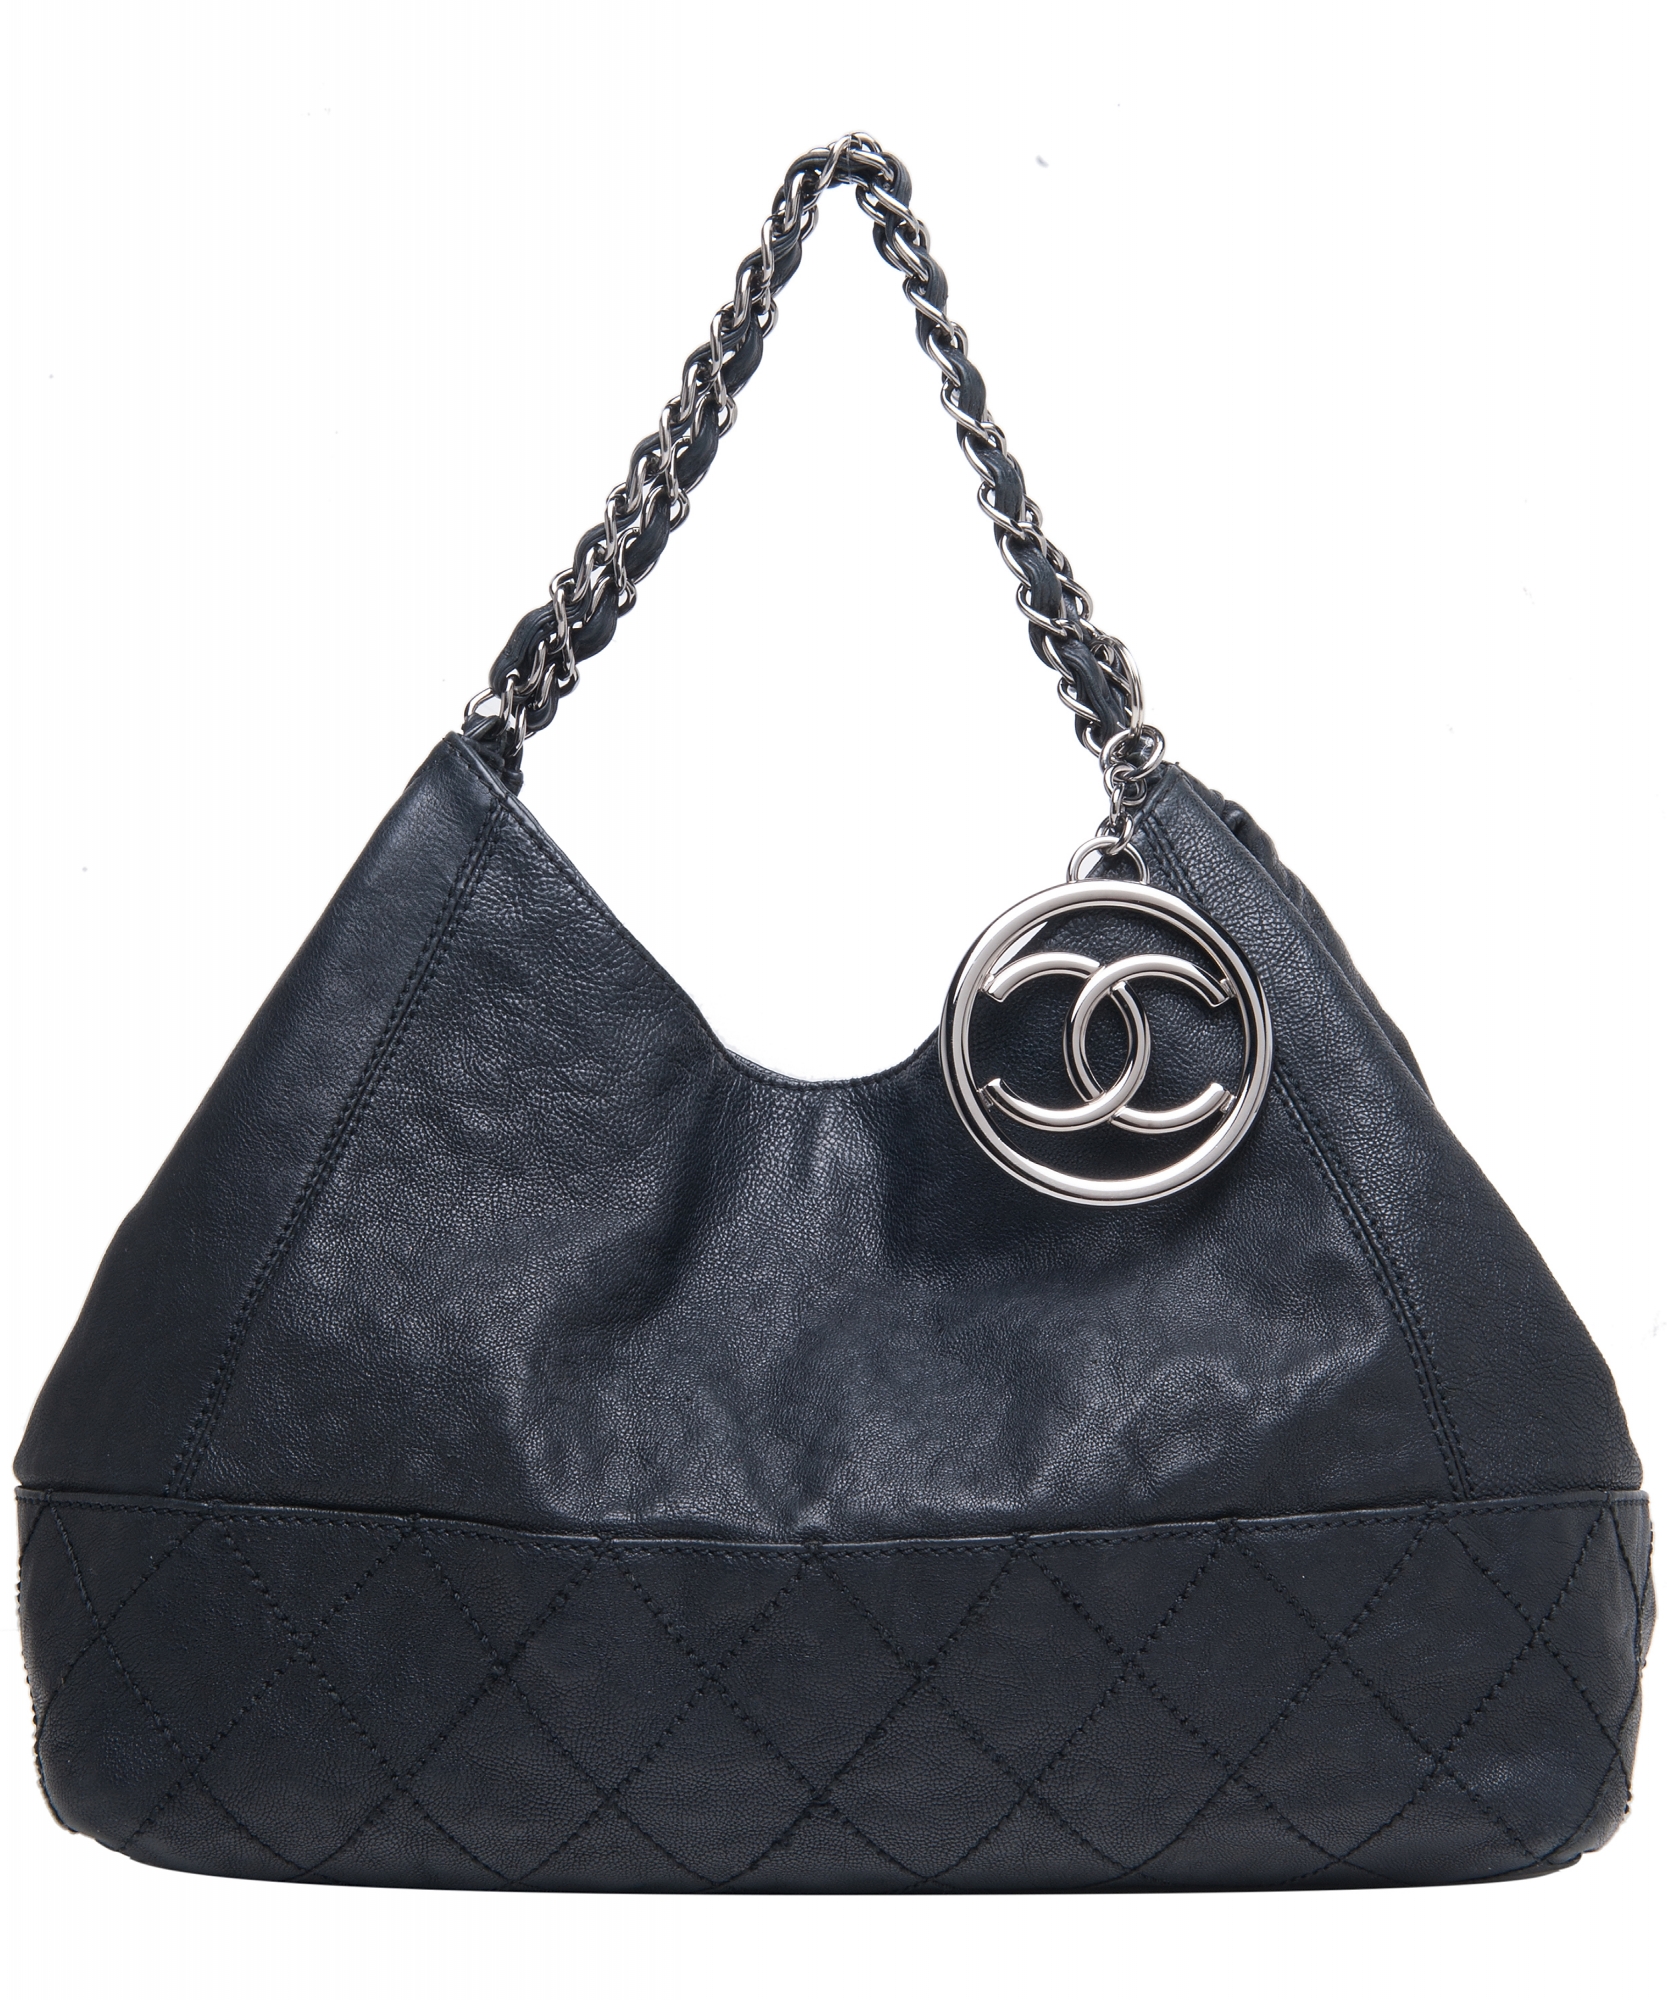 Chanel 'Coco Cabas' Tote Black Leather